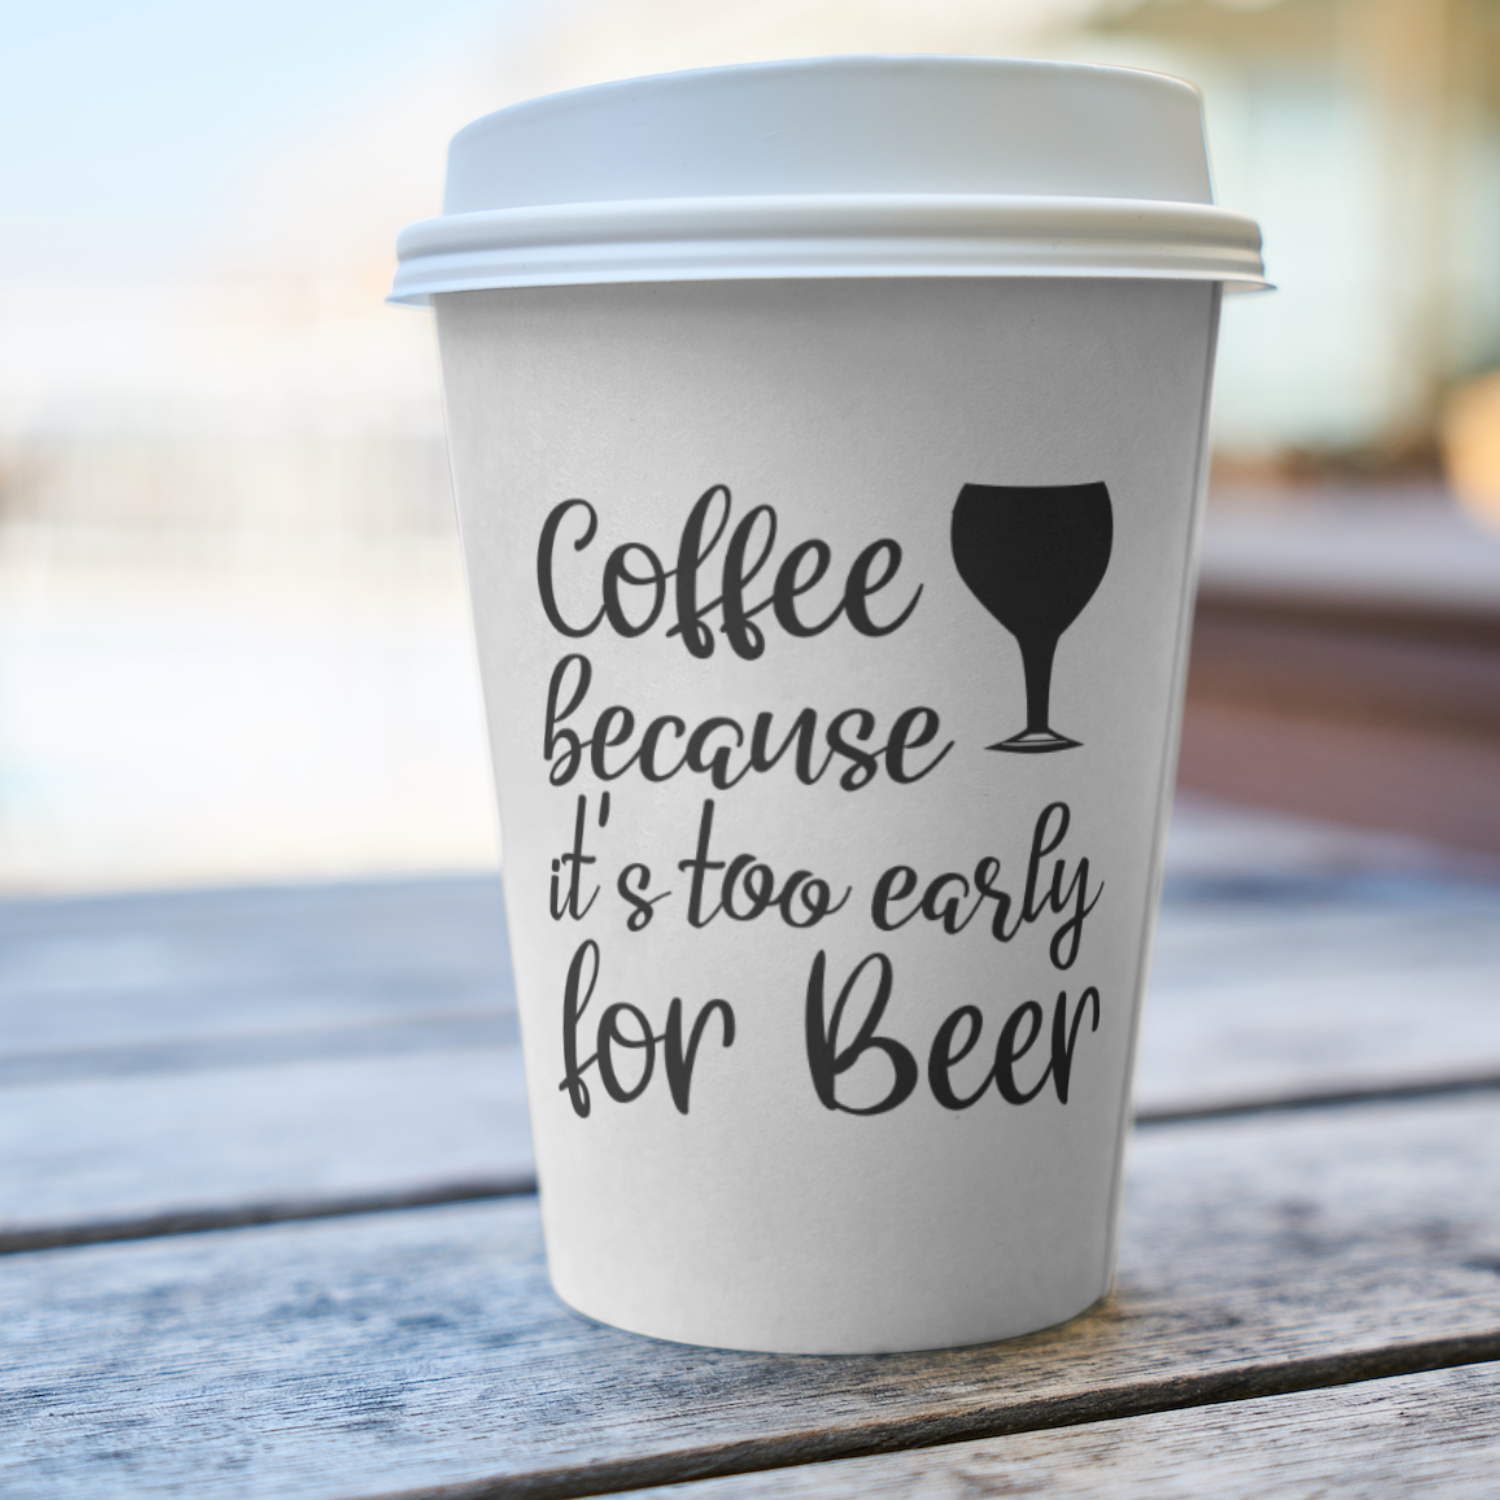 it's too early because Coffee for Beer SVG | Digital Download | Cut File | SVG